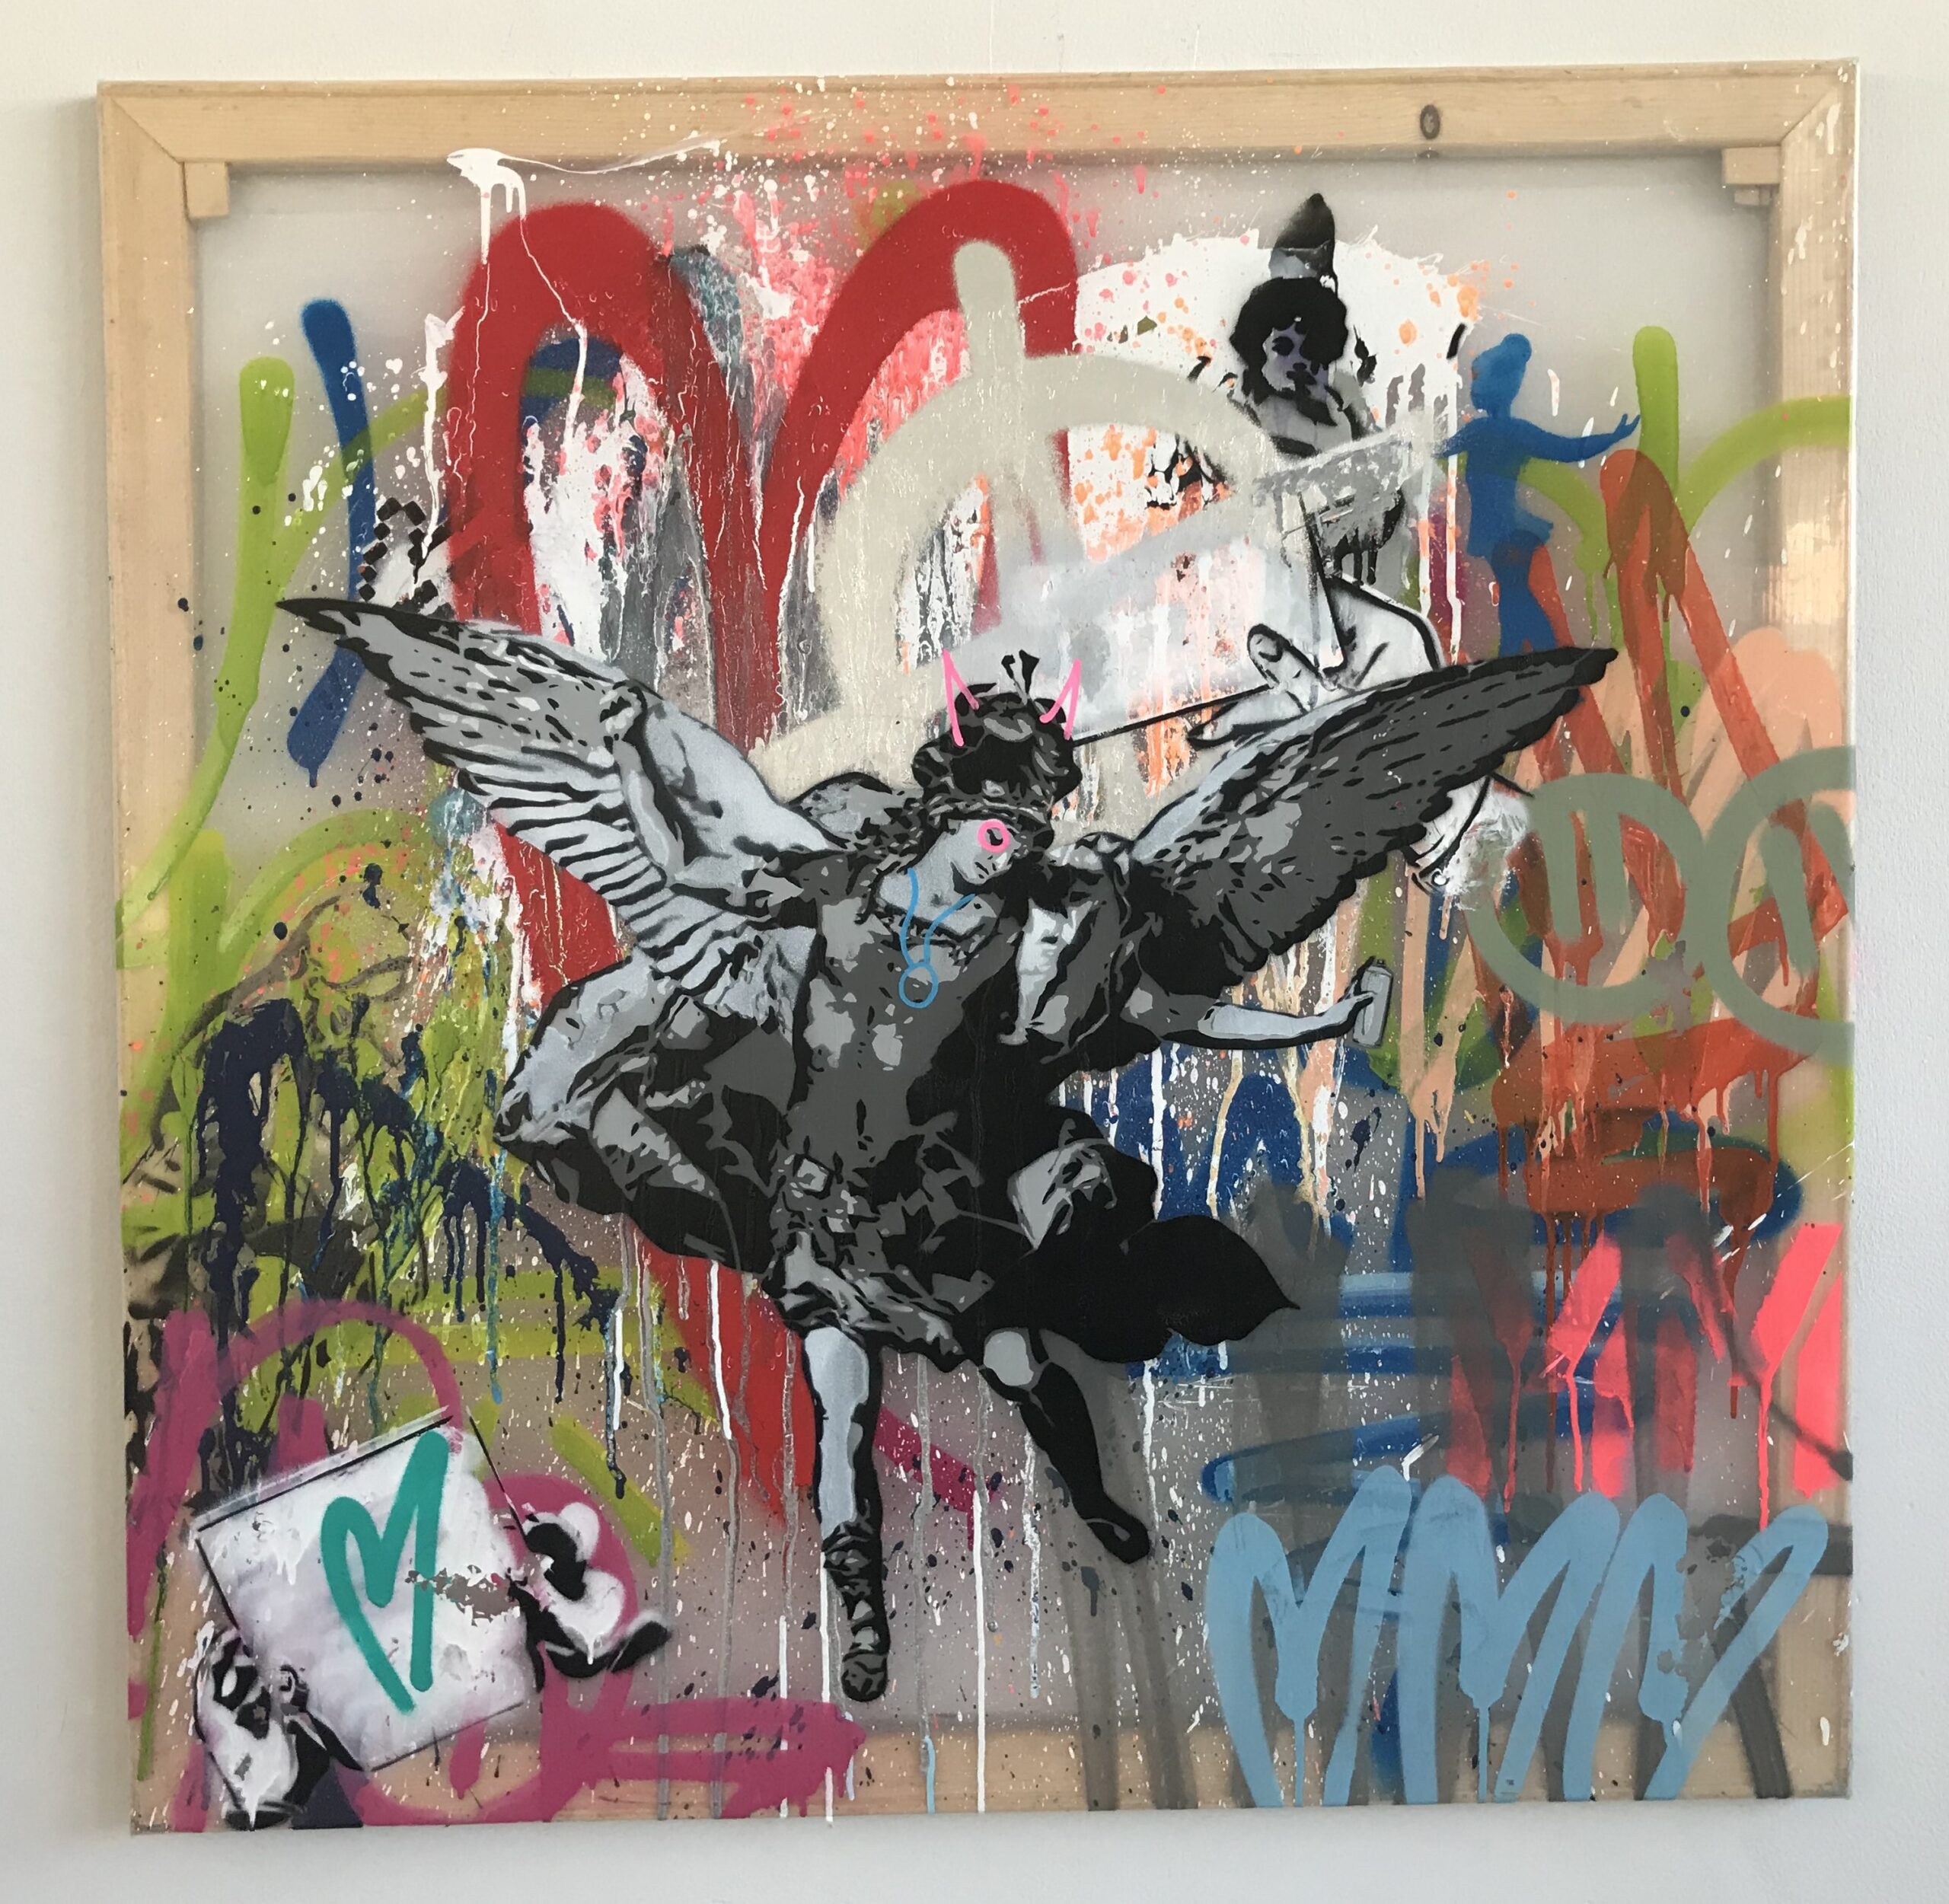 Mart Signed Arcangelo 02 2020 Wall 100x100 Acrylic and mixed media on transparent pvc panel